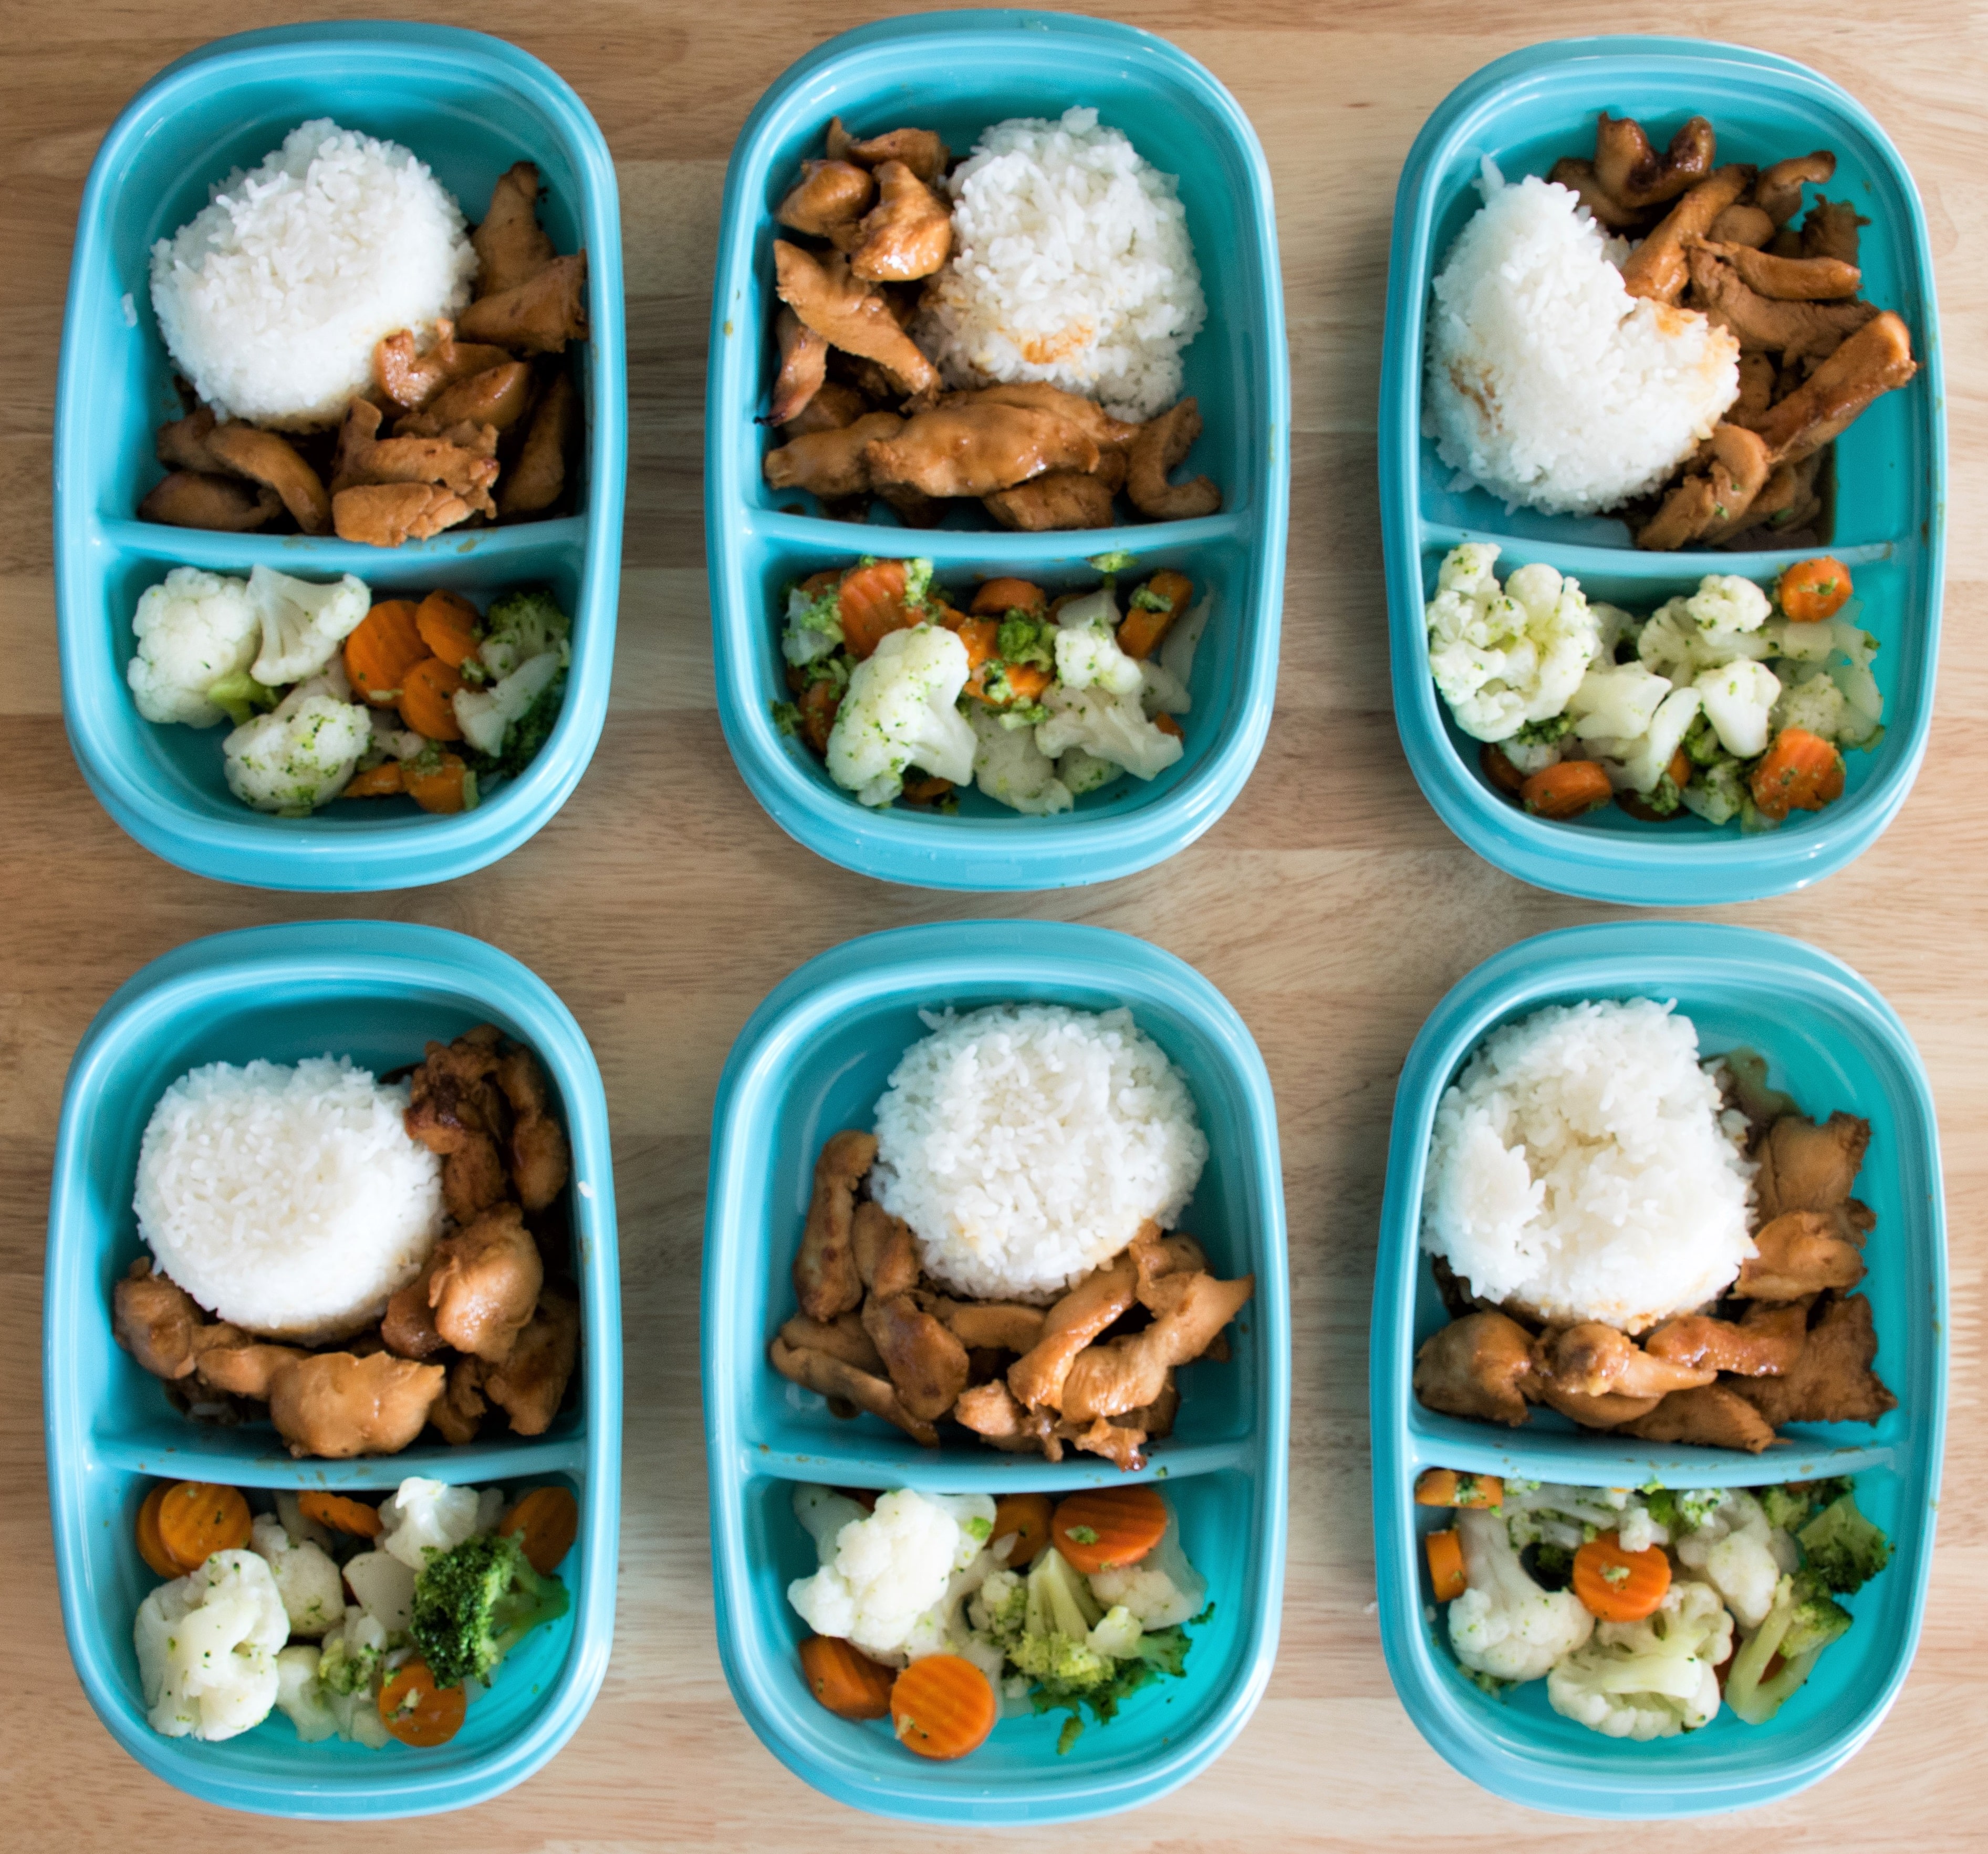 Teriyaki chicken, white rice, and vegetables make great lunches you can meal prep every week. 5 ingredients, 30 minutes, and less than $20 is all you need! Easy, affordable, and delicious!